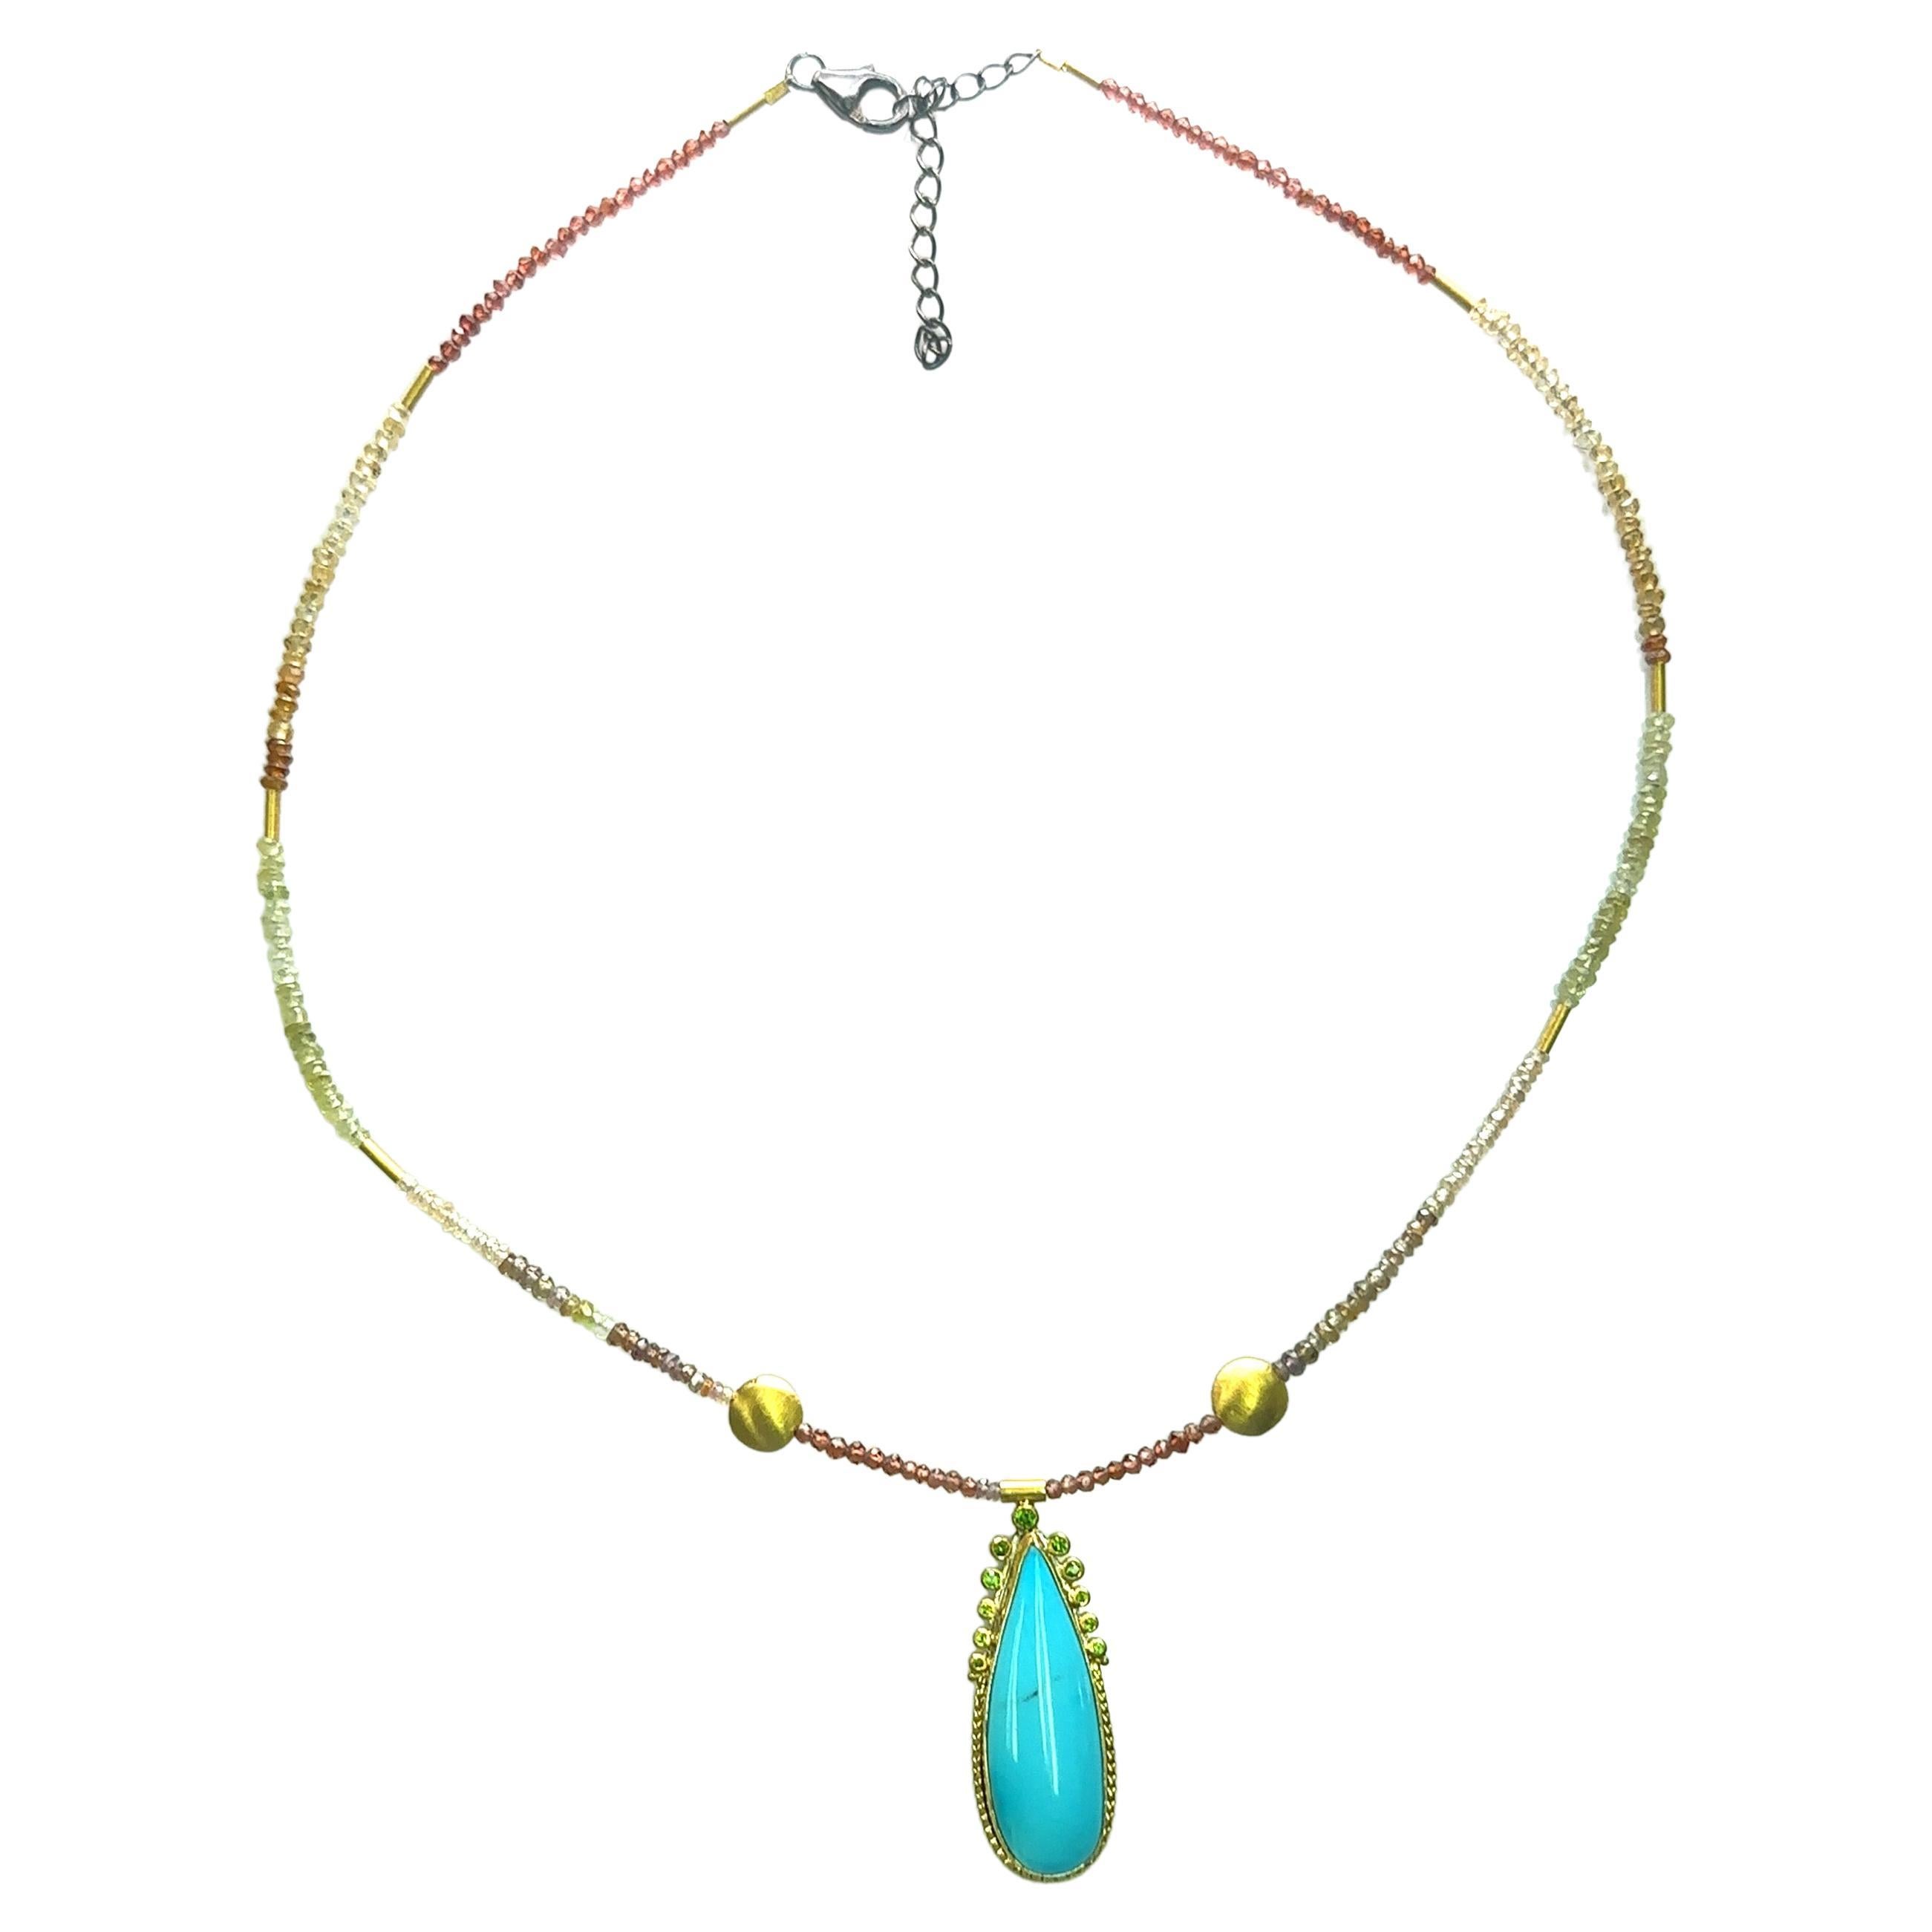 JAS-19-1845 - 24K GOLD/STERLING SILVER w KINGMAN TURQUOISE & MULTI COLOR BEADS For Sale